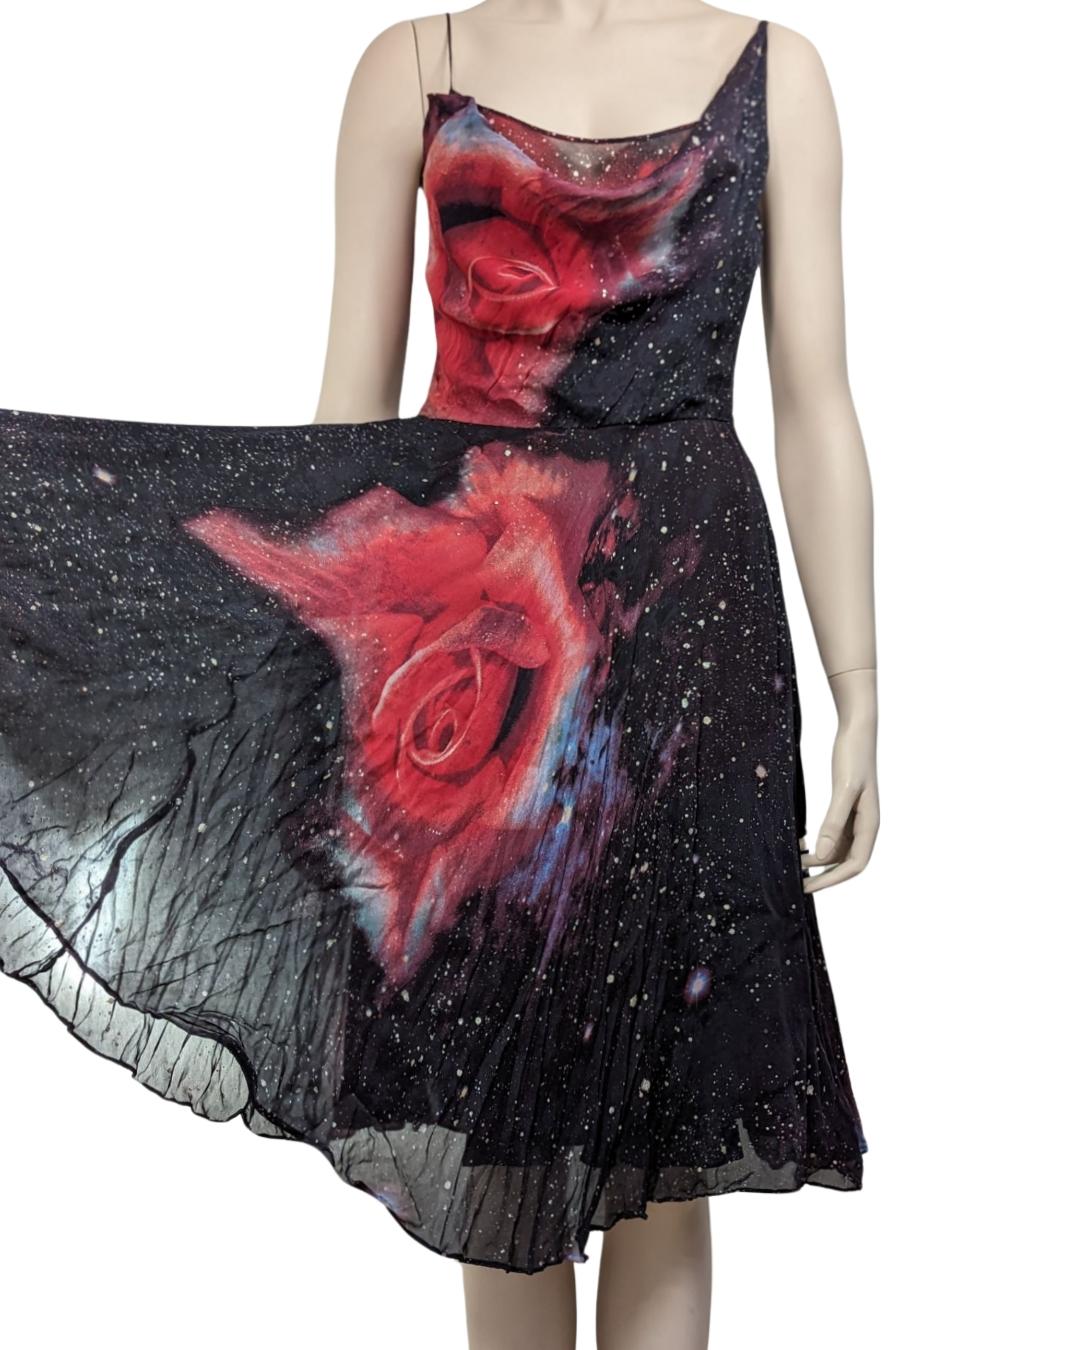 By Roberto Cavalli silk dress with cosmic red roses on a black sky with stars. 

. Asymmetric neckline
· no transparency
· zip on the side
 

Size fits S

Flat measurements :

Breast : 40 cm
Waist : 32cm
Hips : 40 cm
Length : 130cm
 
Colors :